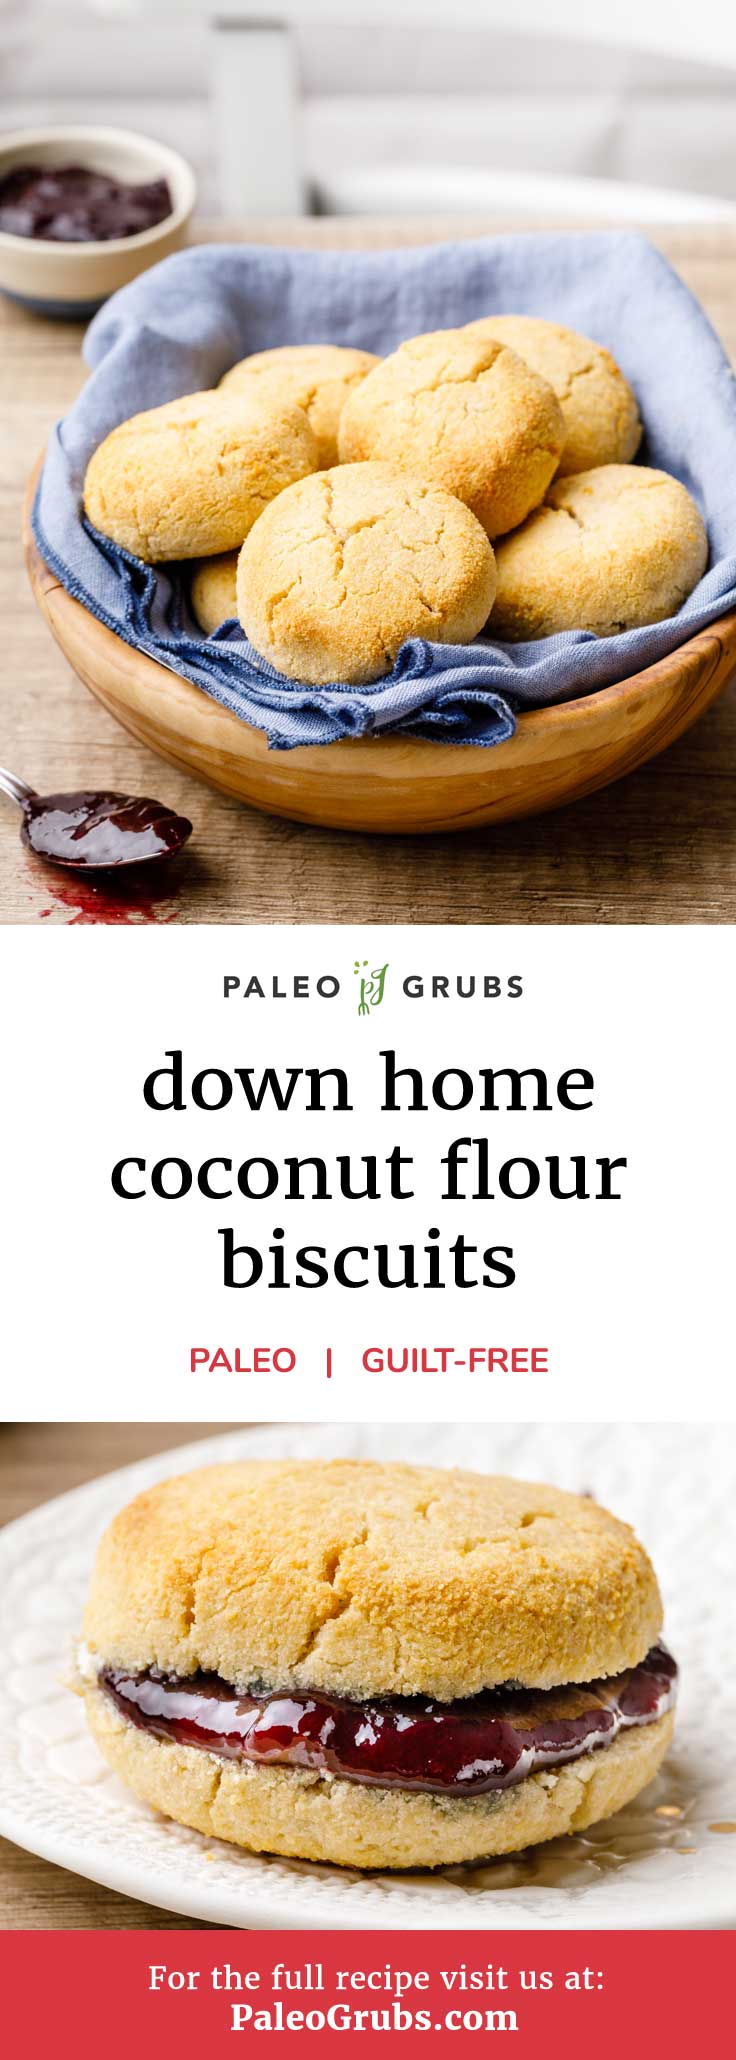 This recipe for down home coconut flour biscuits will surely bring back your fondest memories of growing up and visiting your relatives. Whether you enjoy your biscuits served with homemade gravy or topped with butter, I’m positive this recipe will become one of your new favorites. These biscuits are perfect as either an afternoon snack or as a complementary side with your favorite paleo dinner.